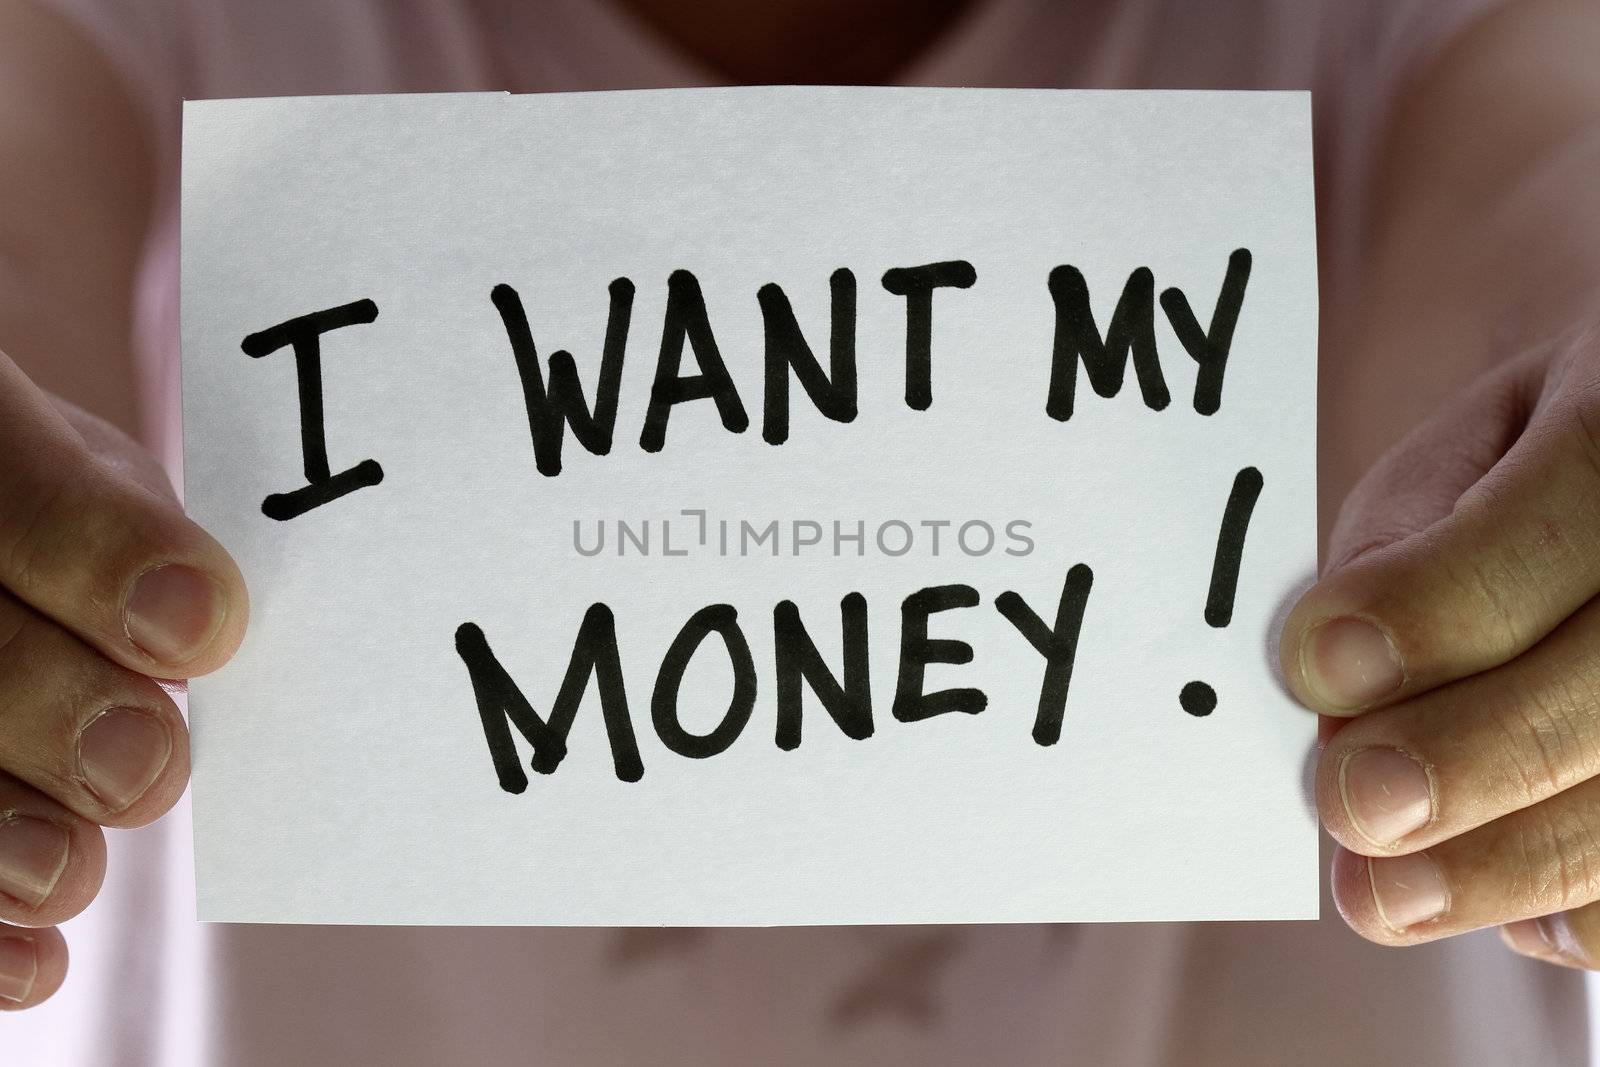 I want my money concept - many uses in finance.